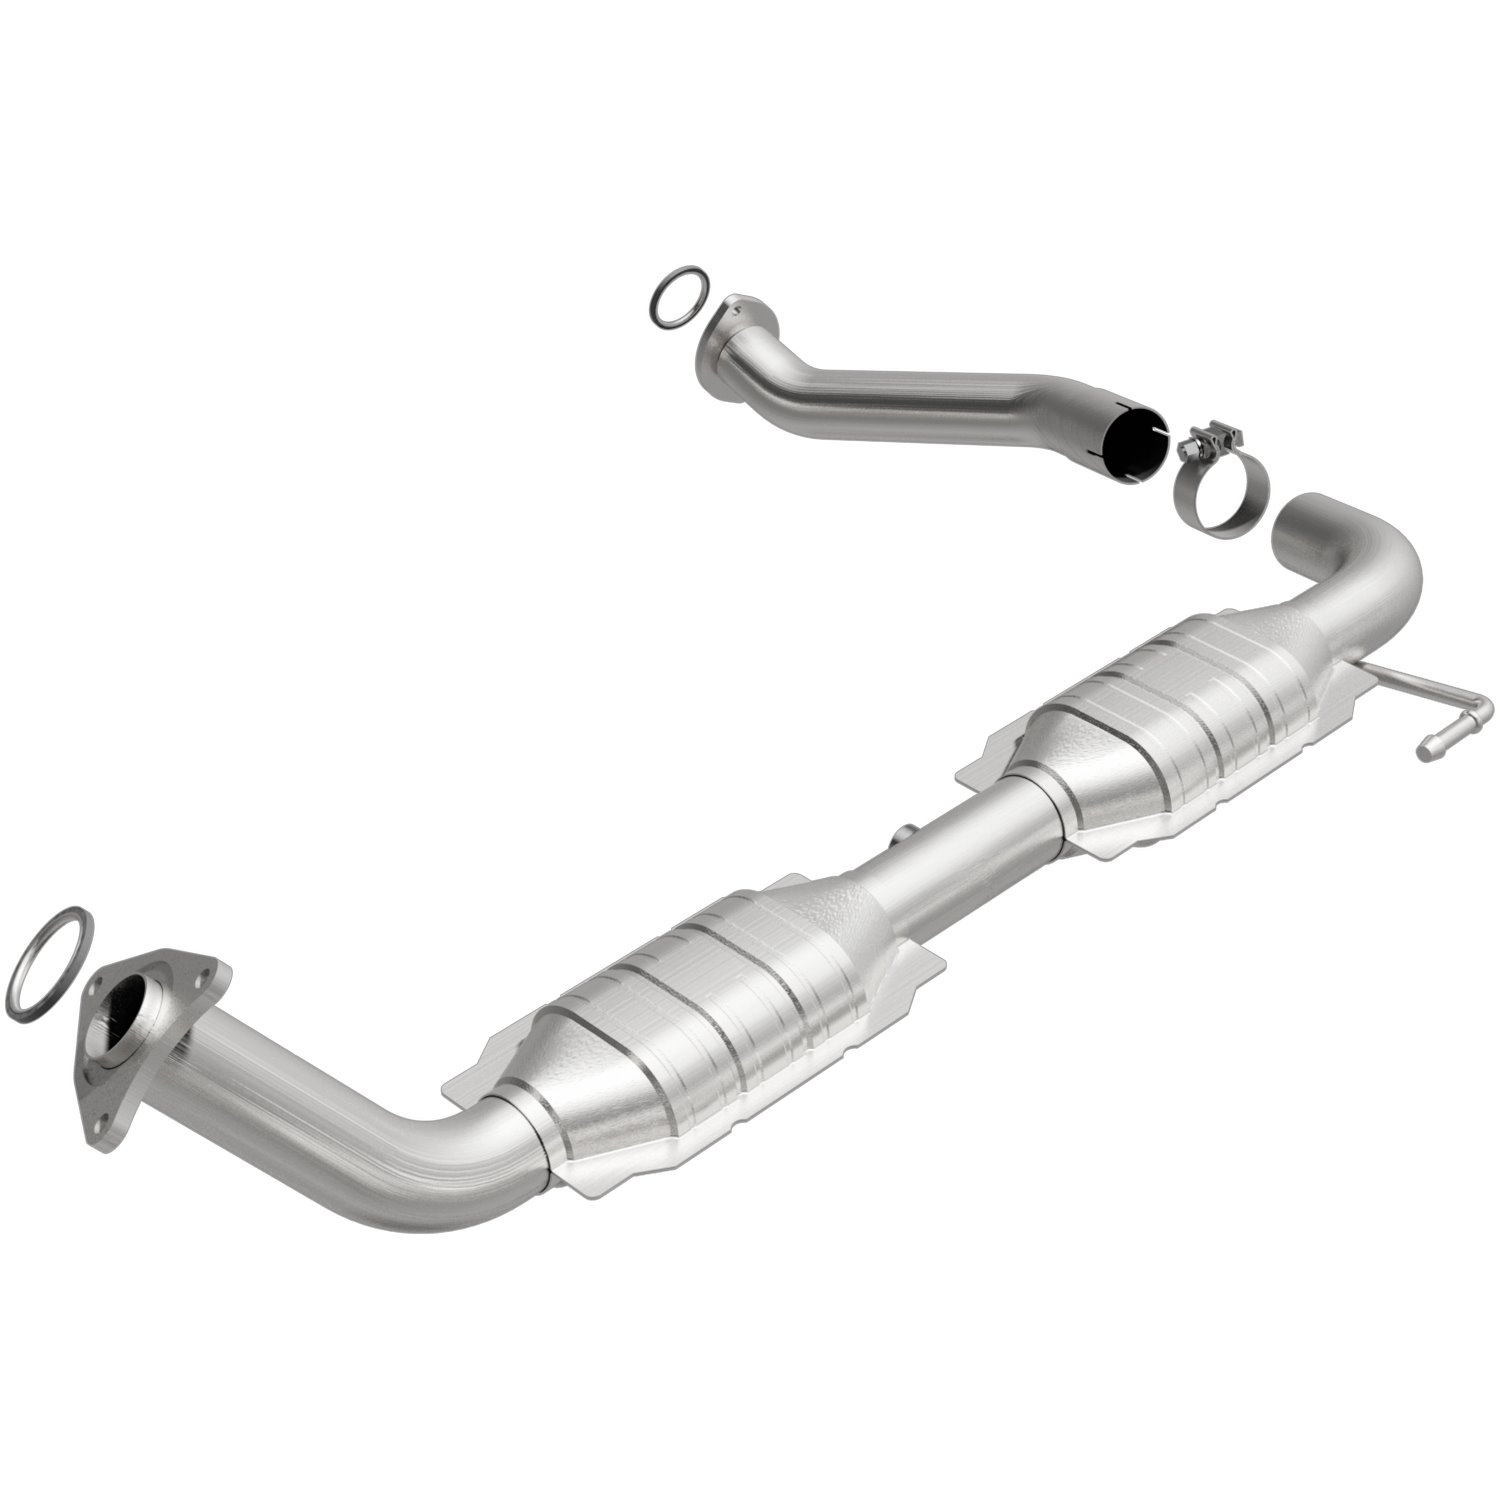 2007-2010 Toyota Tundra HM Grade Federal / EPA Compliant Direct-Fit Catalytic Converter